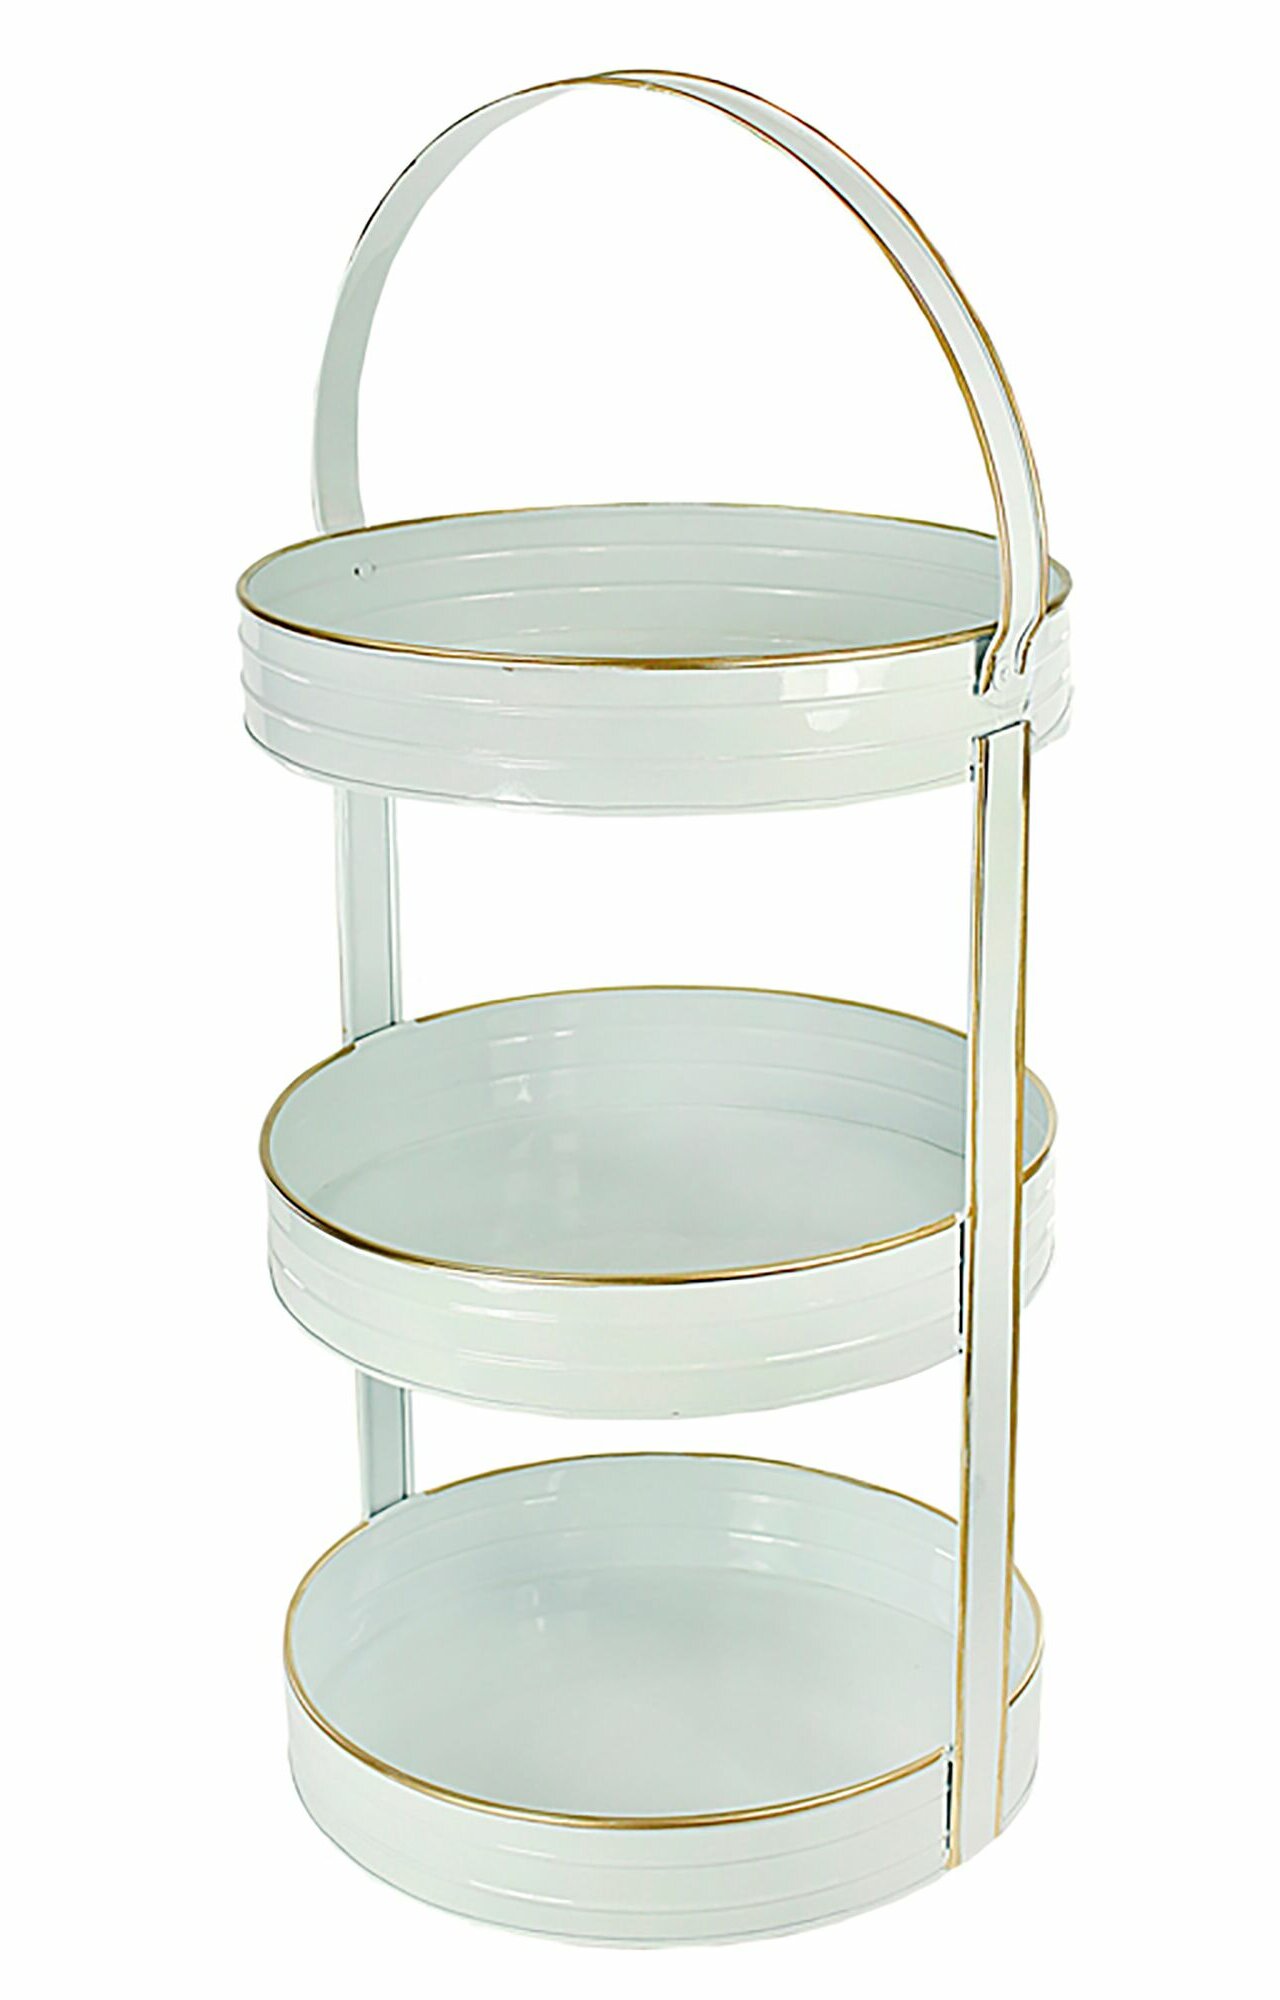 wooden 3 tier cake stand